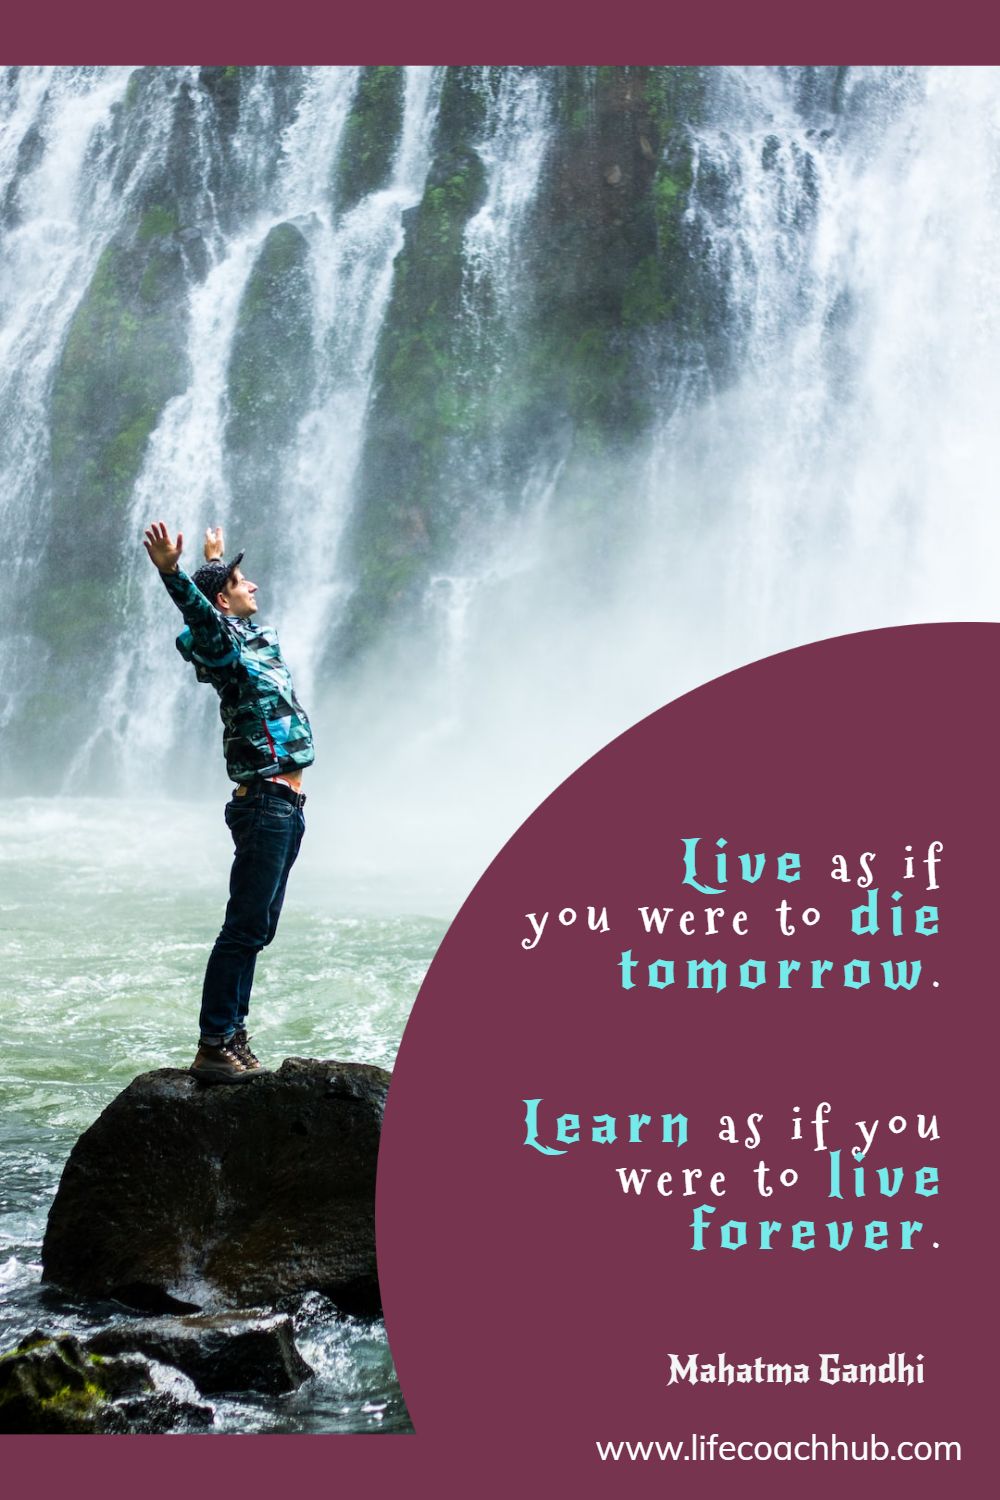 Live as if you were to die tomorrow. Learn as if you were to live forever. Mahatma Gandhi Coaching Quote